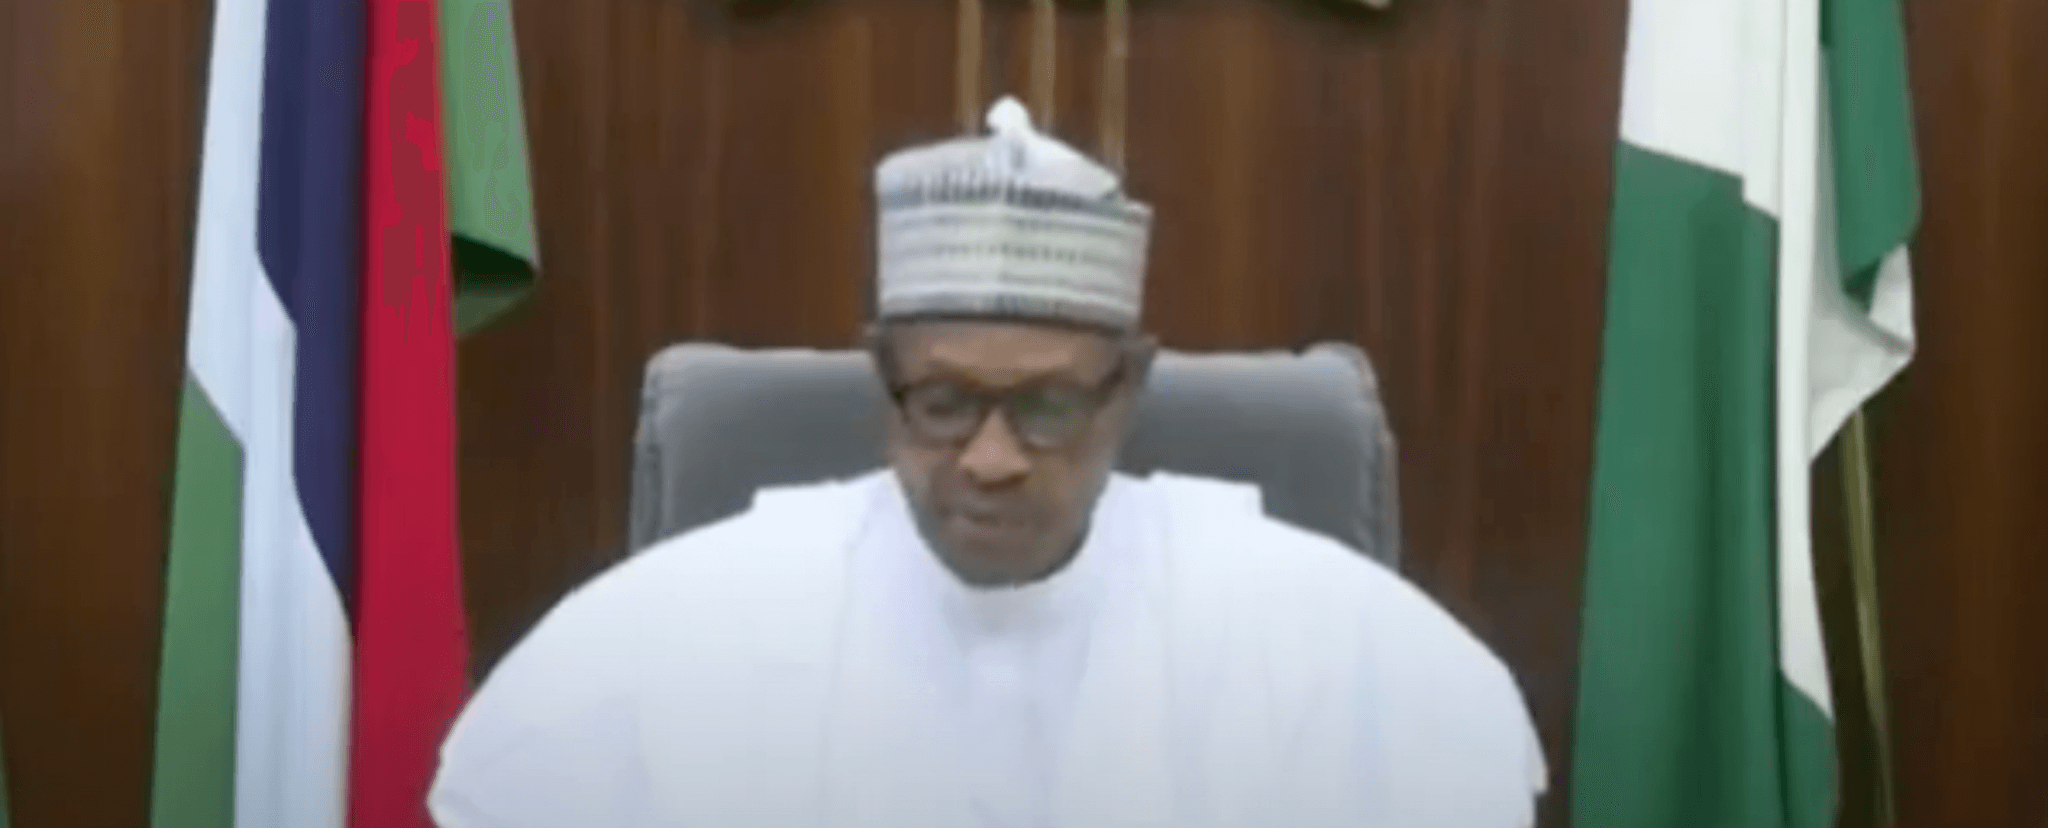 ICYMI: Here are the takeaways from Buhari’s address to the nation